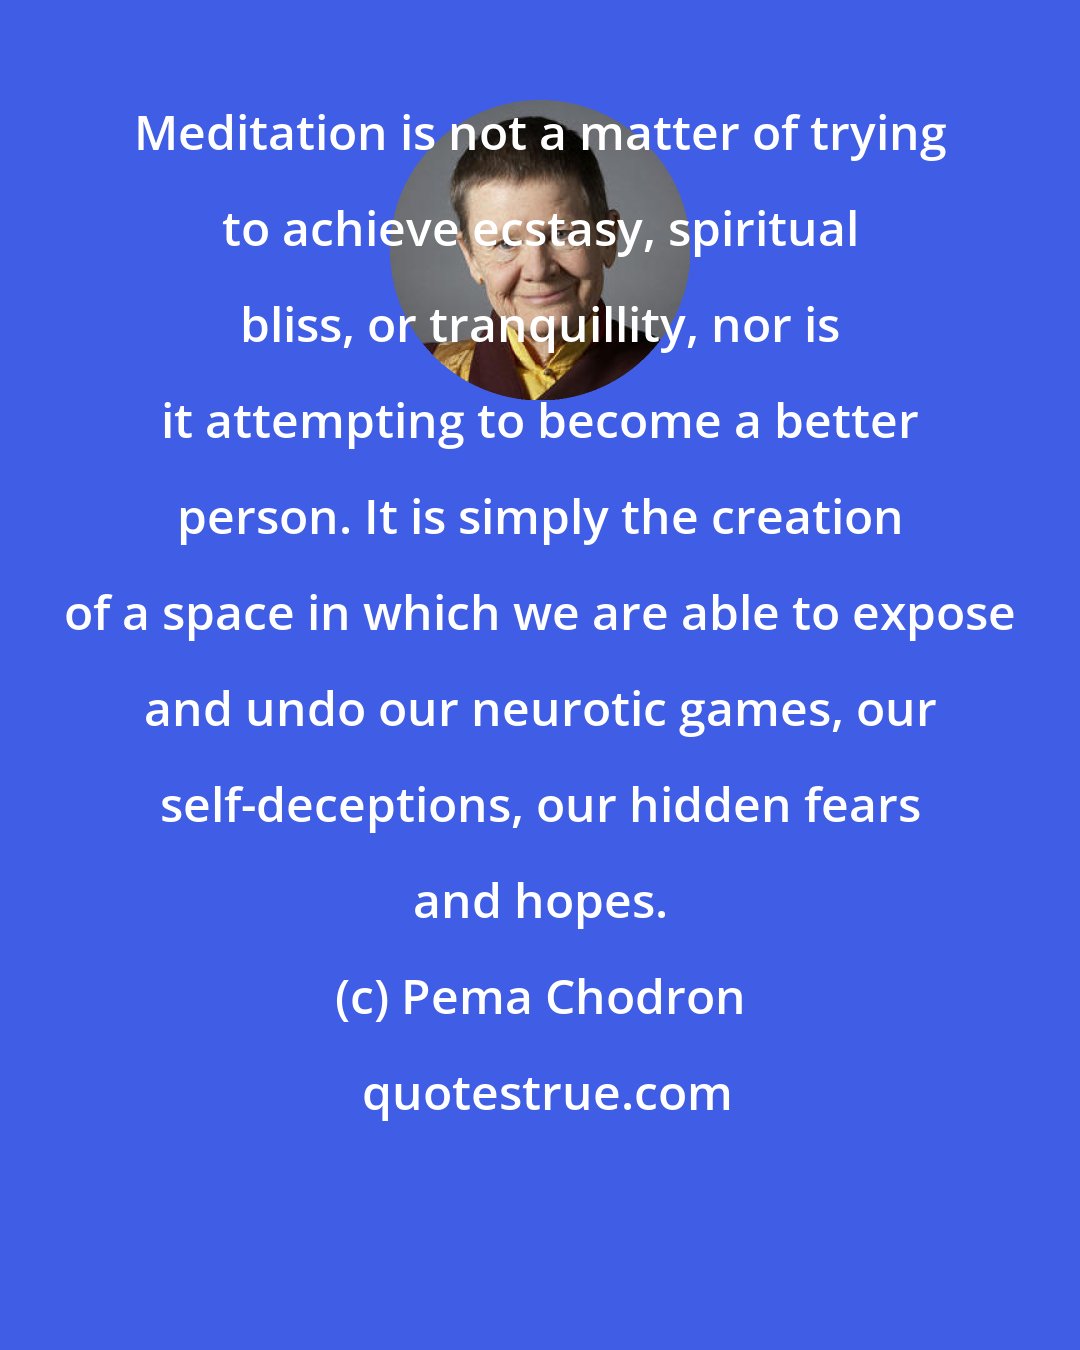 Pema Chodron: Meditation is not a matter of trying to achieve ecstasy, spiritual bliss, or tranquillity, nor is it attempting to become a better person. It is simply the creation of a space in which we are able to expose and undo our neurotic games, our self-deceptions, our hidden fears and hopes.